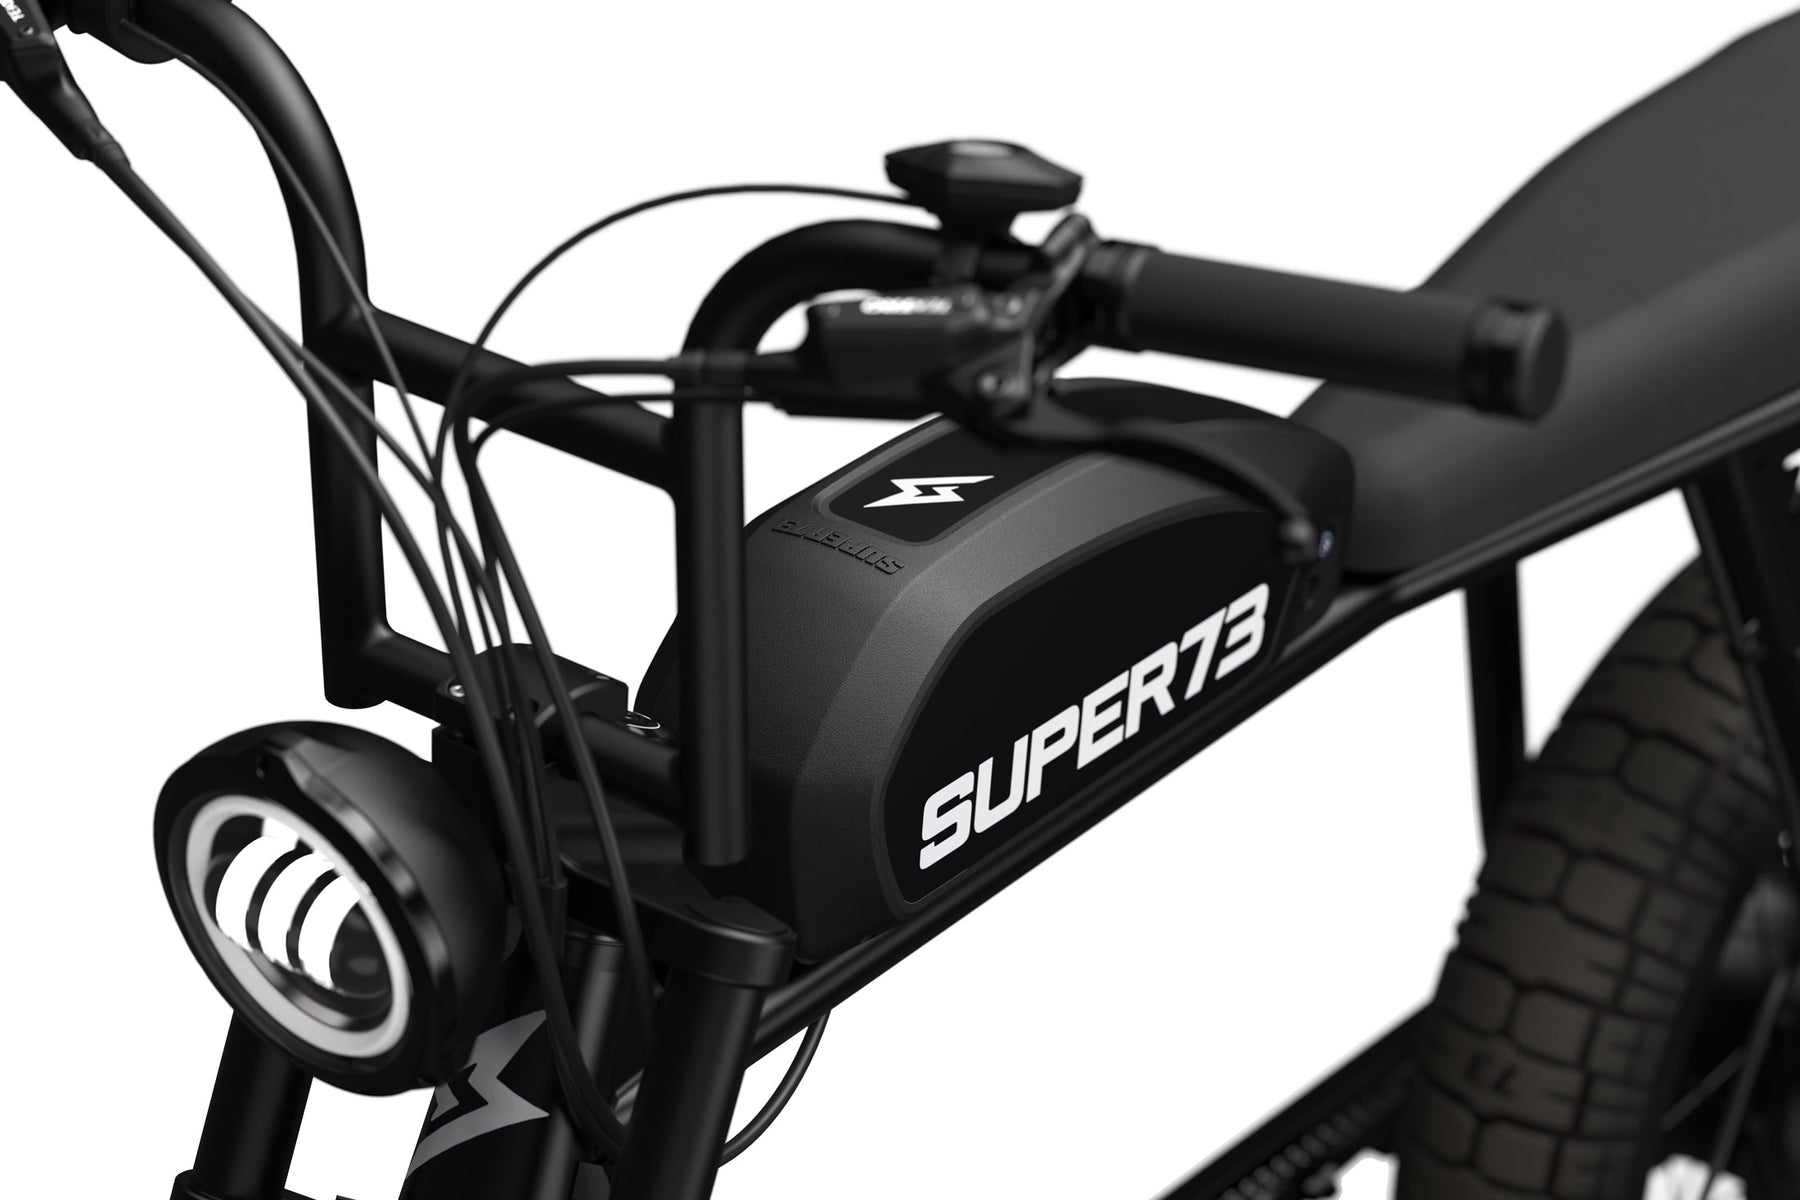 Closeup view of S2: Obsidian, Super73 ebike battery